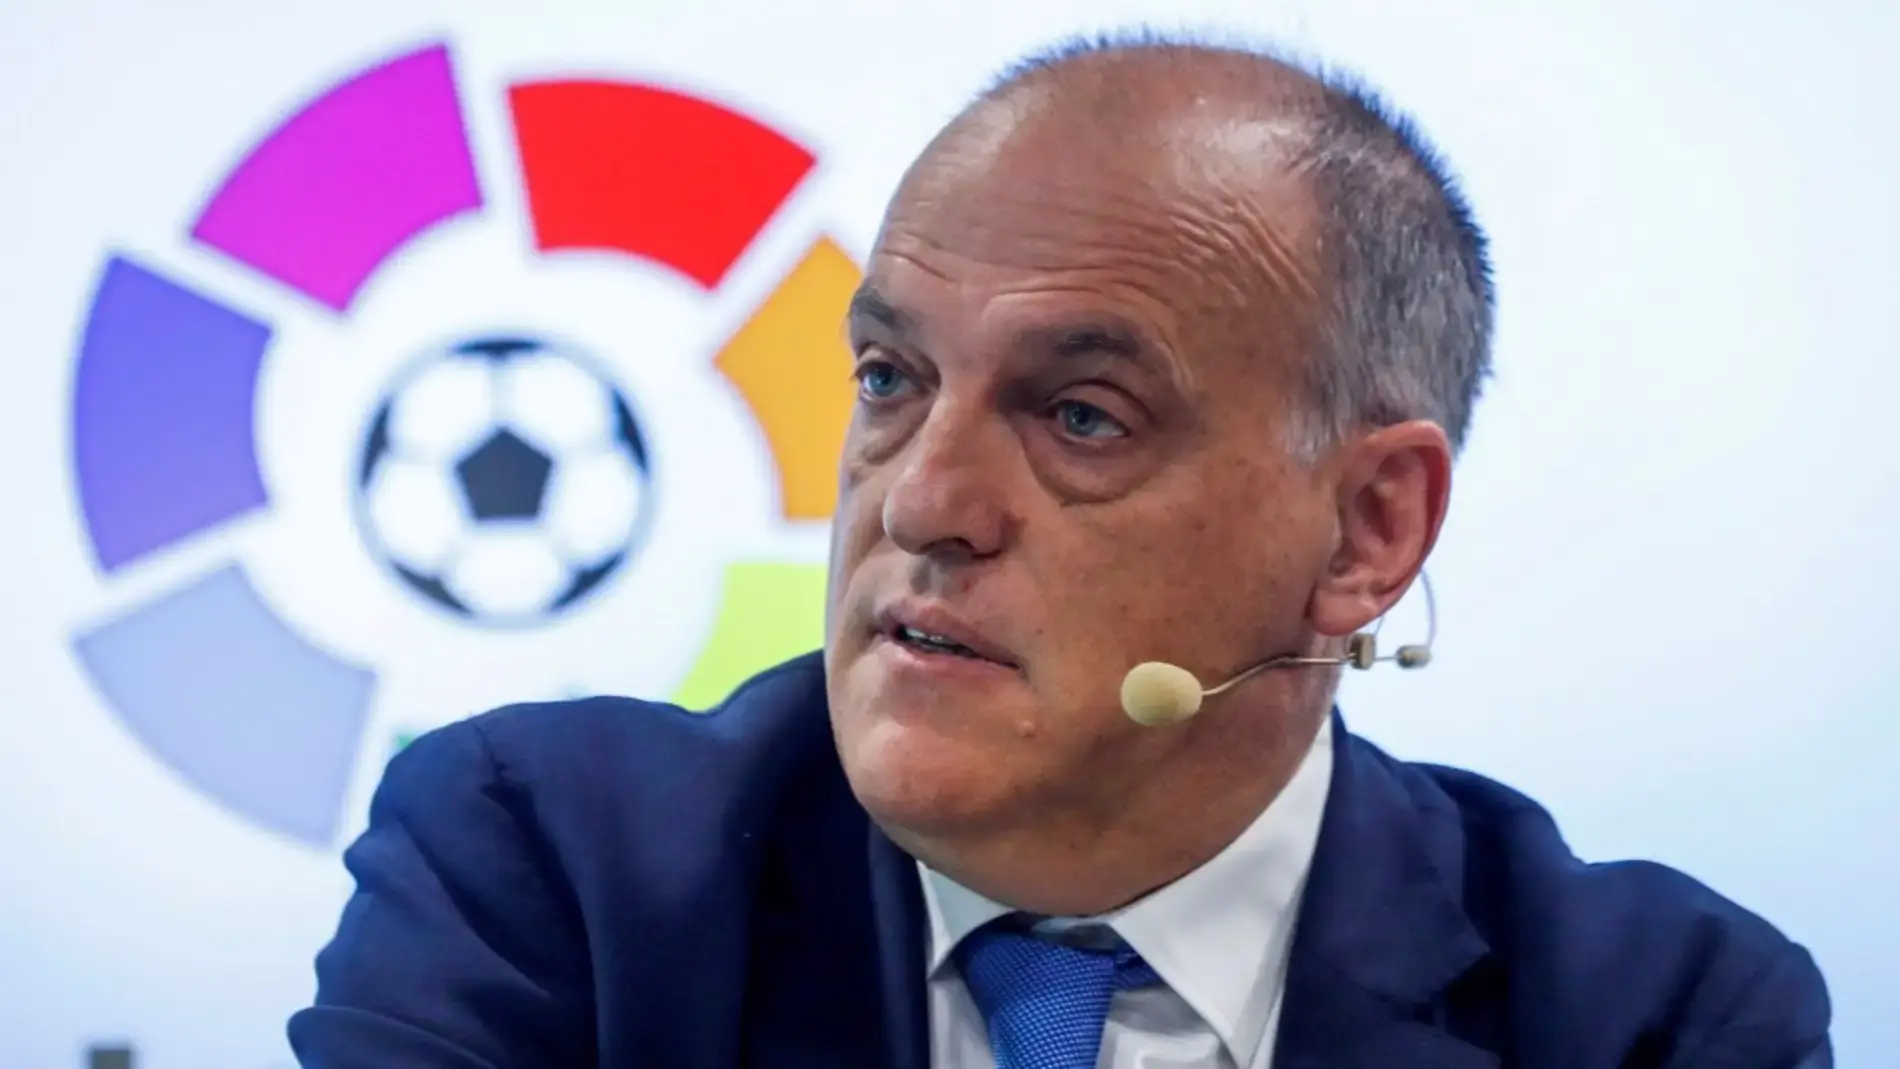 Tebas and LaLiga in ridicule with the classification of Sevilla FC for the final of the Europa League
	
